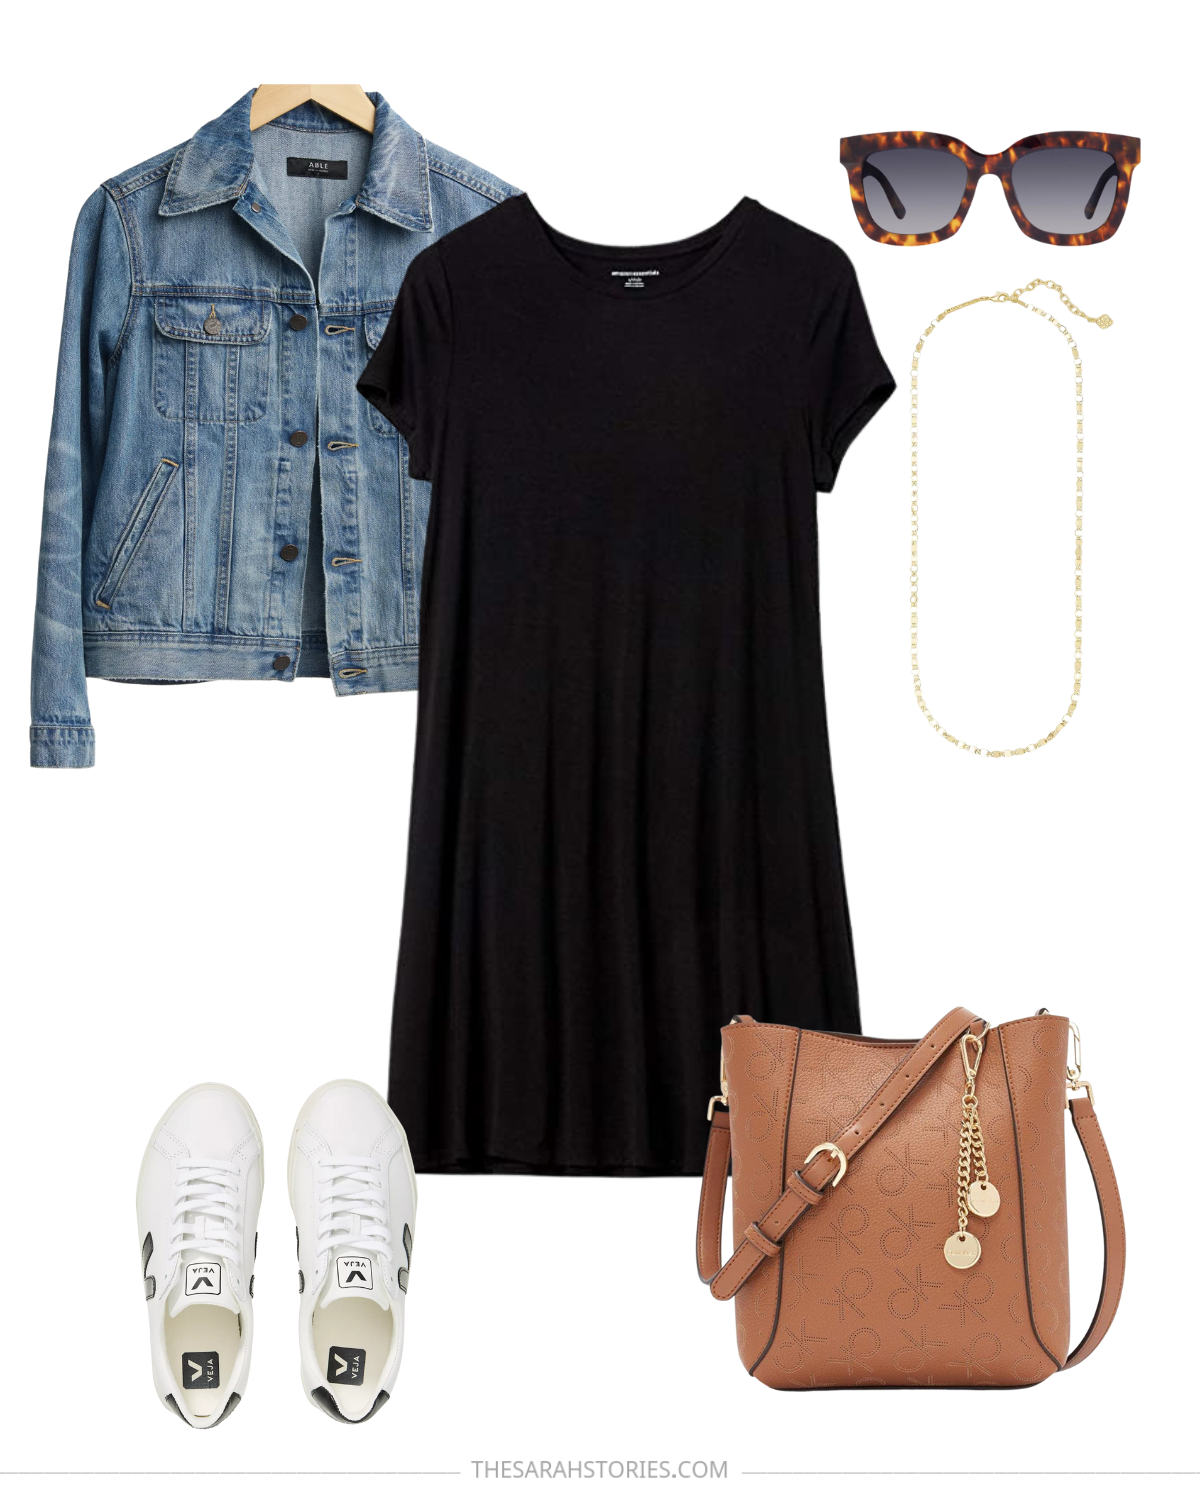 10+ casual everyday fits for the stylish mom